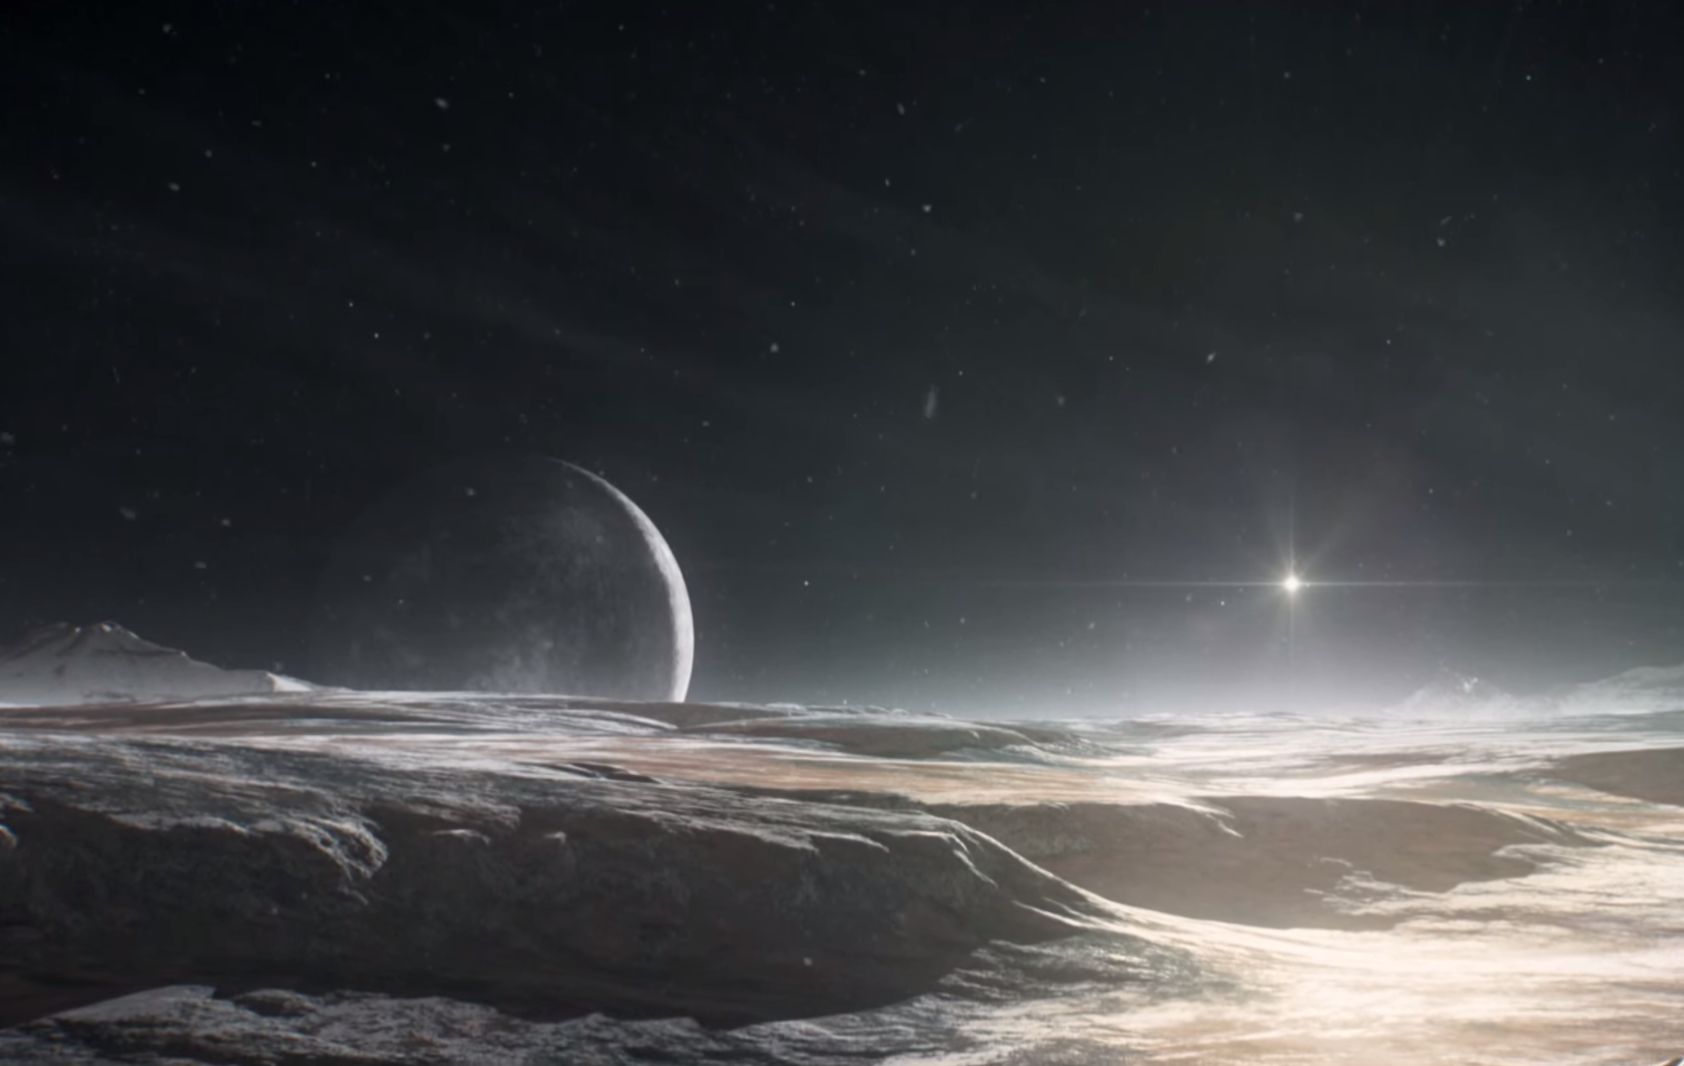 An artist's rendering of Pluto's surface, with Charon looming large on the horizon. The double-planet Pluto-Charon system, represent the last unexplored frontier of the Solar System, which will be unveiled in all its glory in just a few days from now. Image Credit: National Space Society